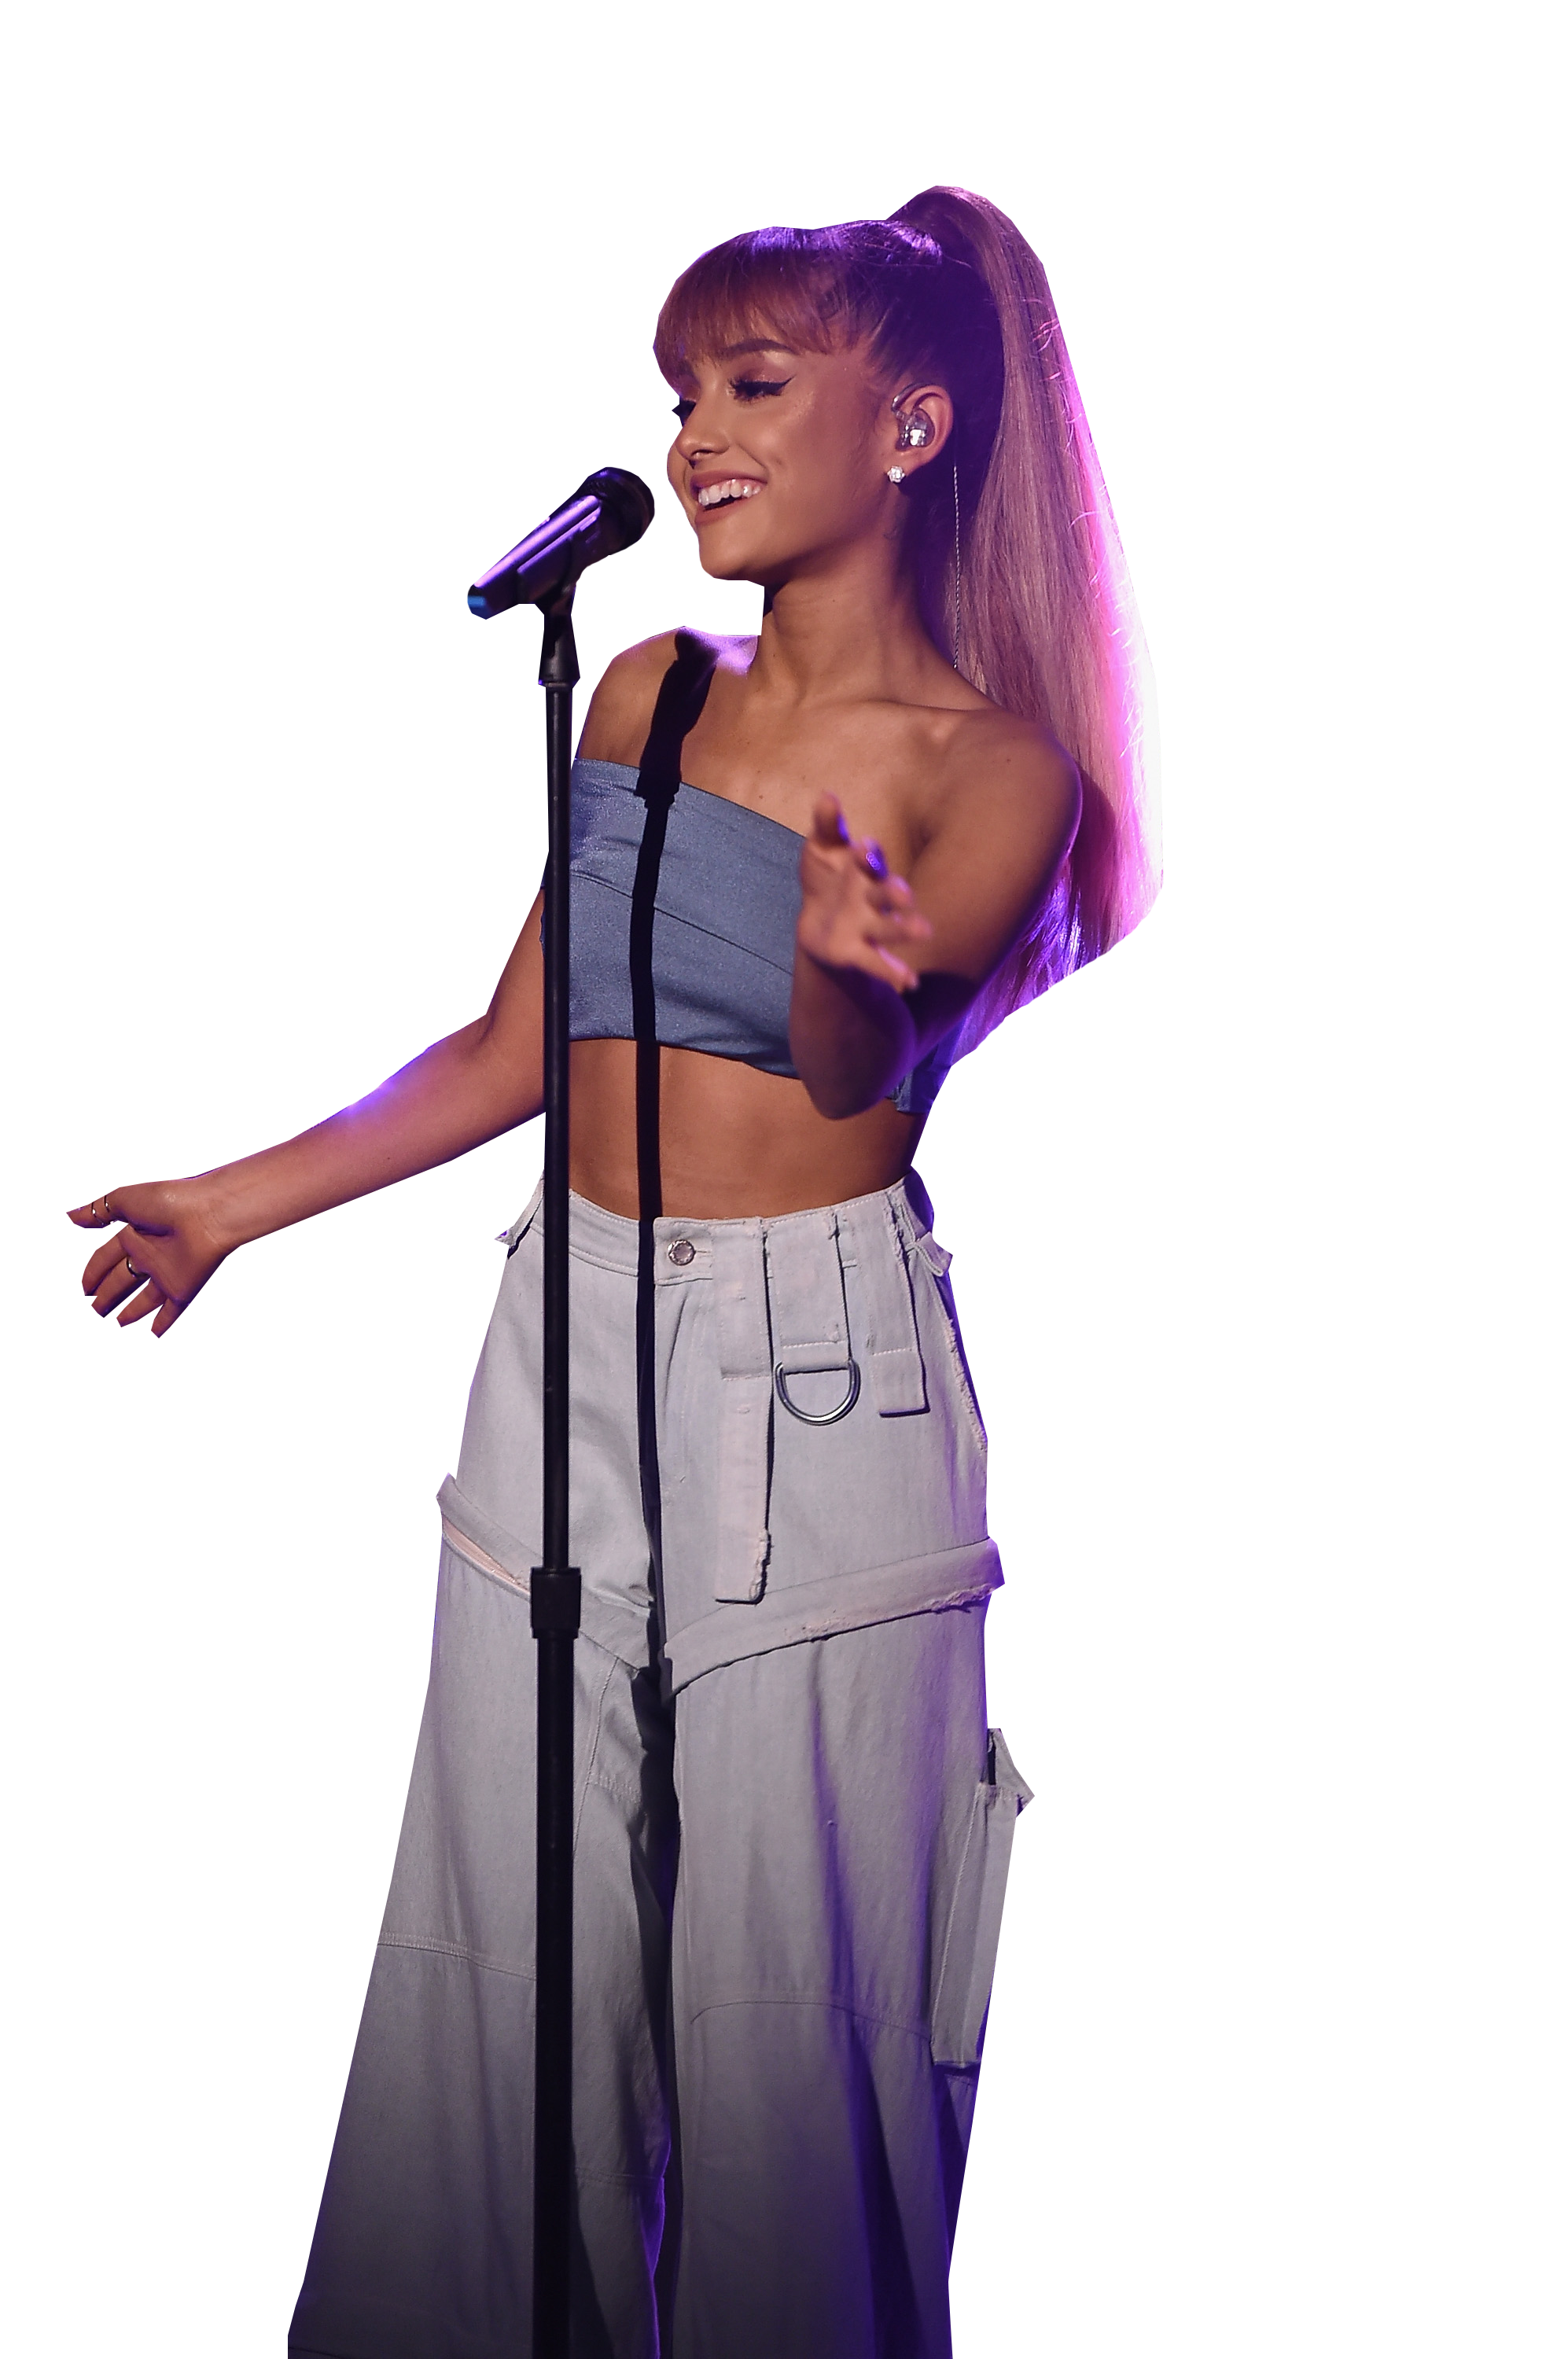 Ariana Grande on Stage